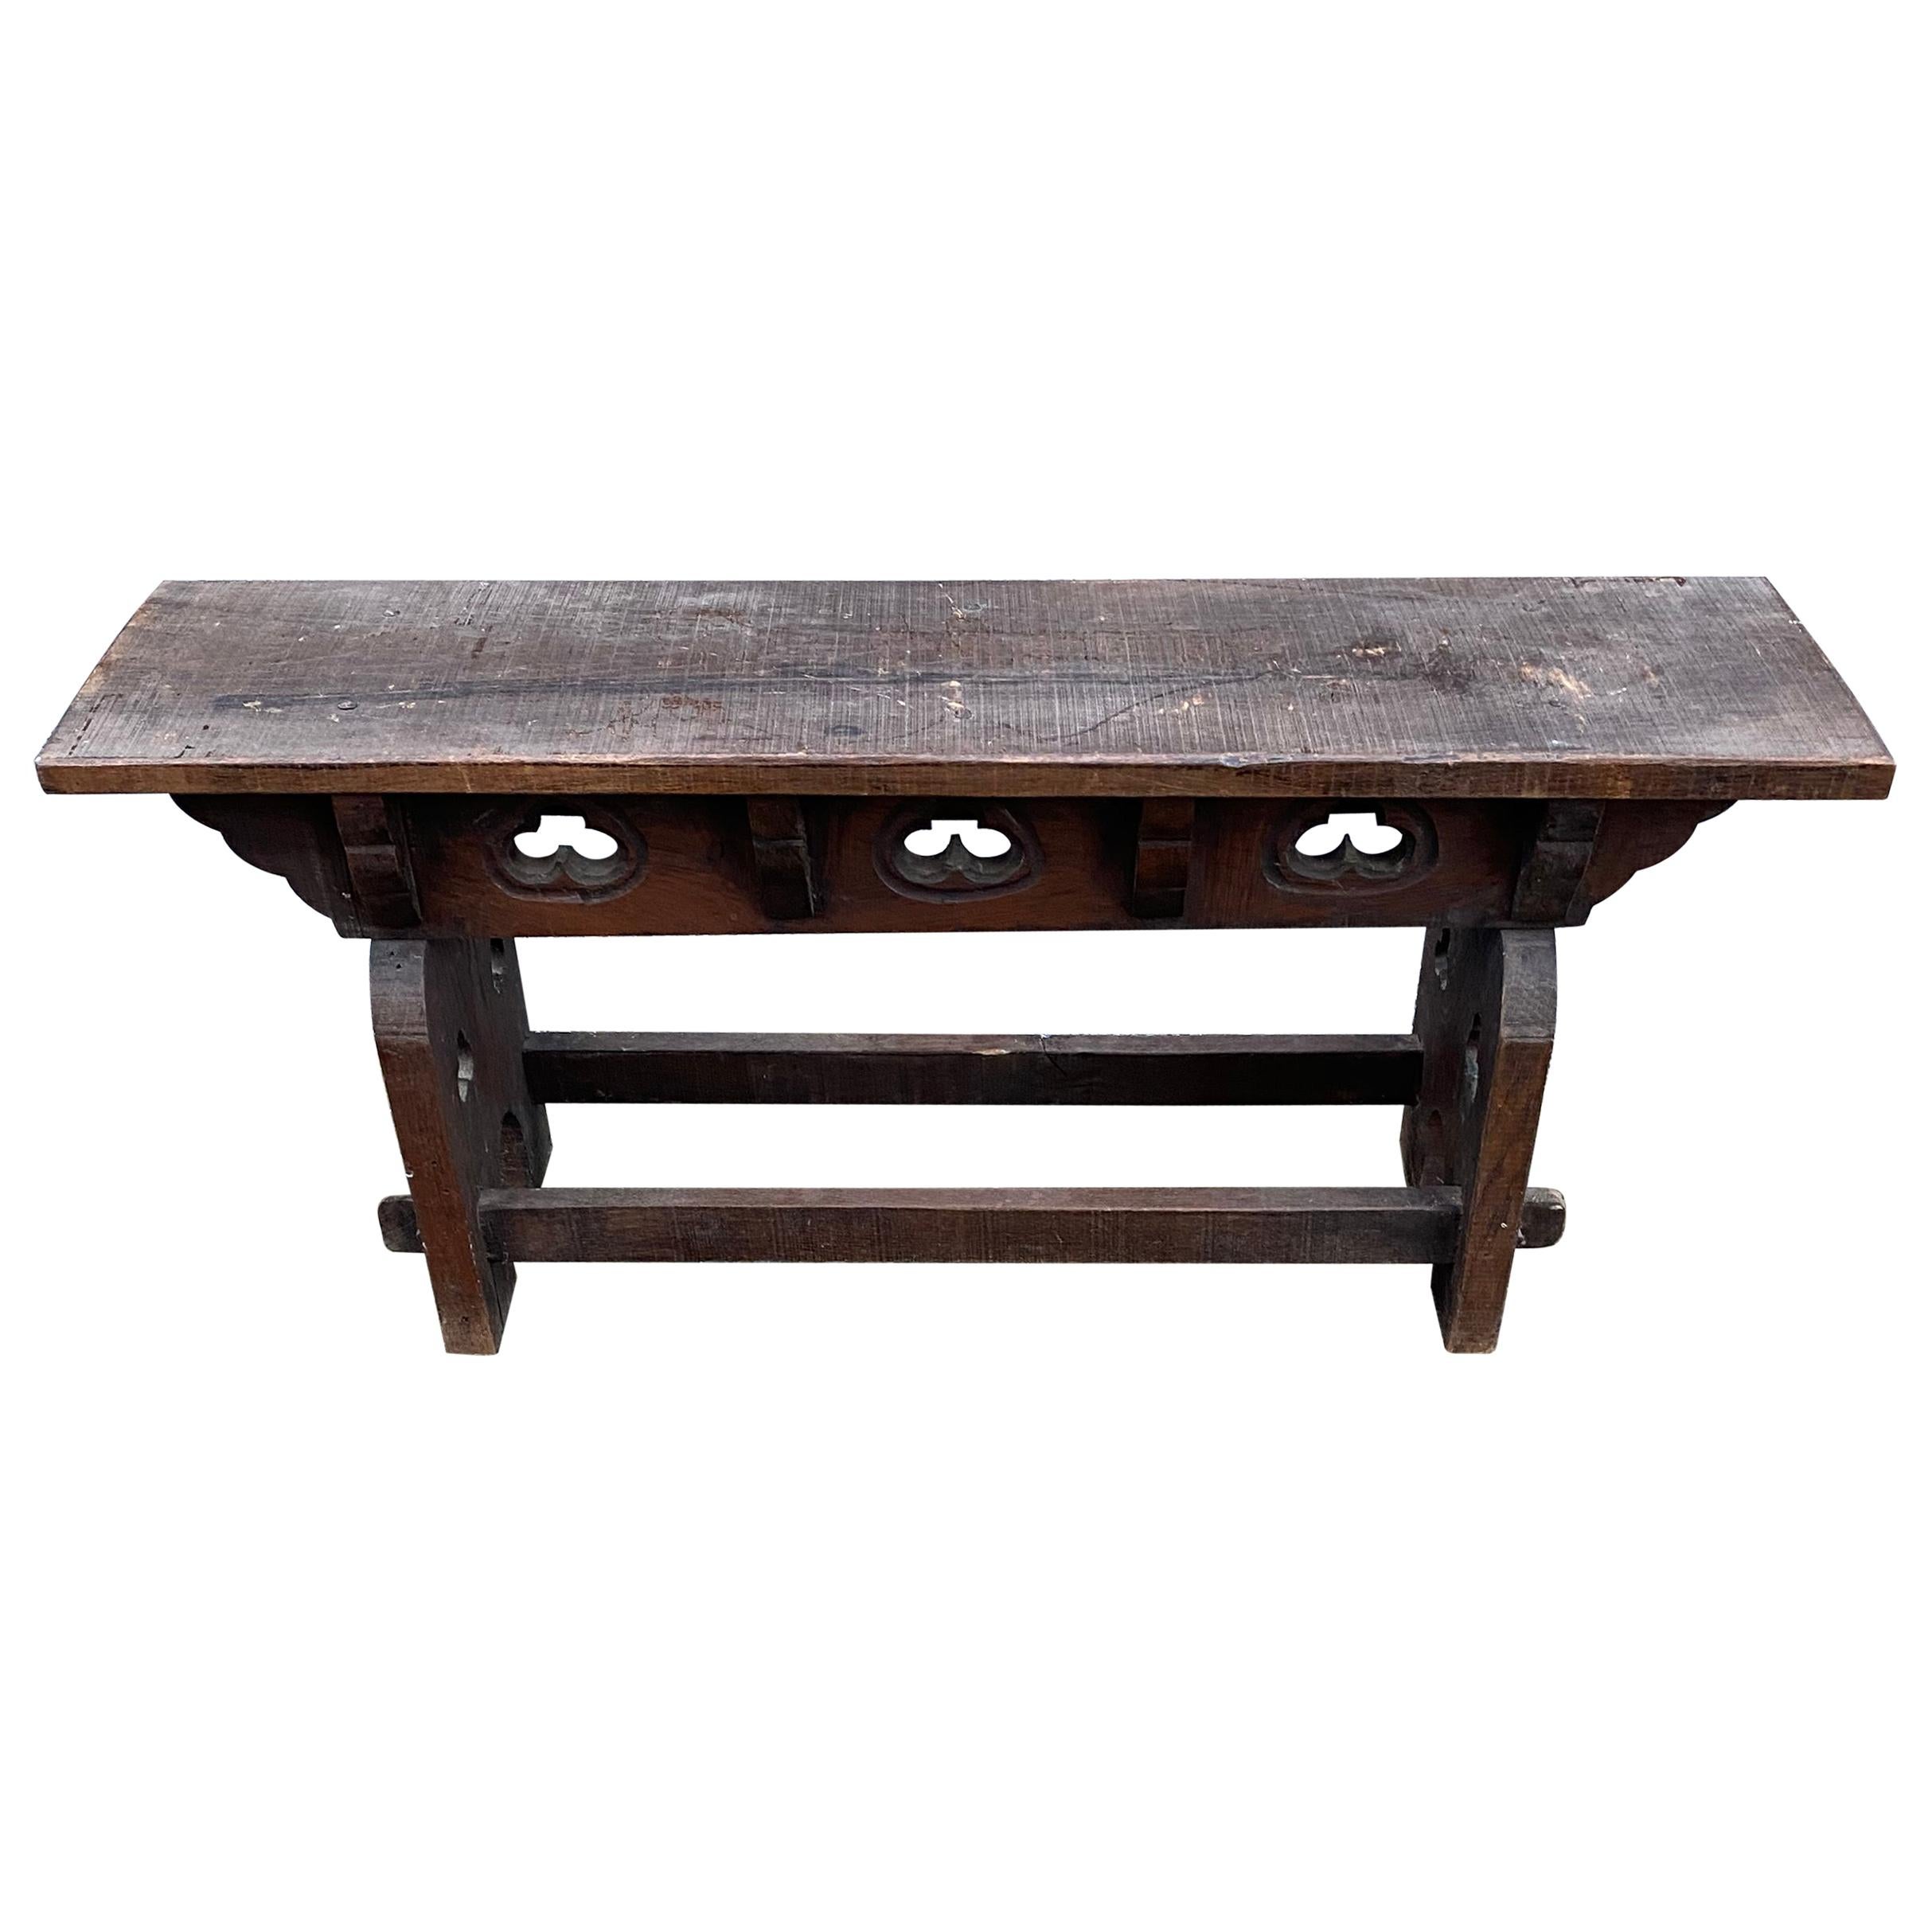 Neo Gothic Style Oak Bench, circa 1950 For Sale